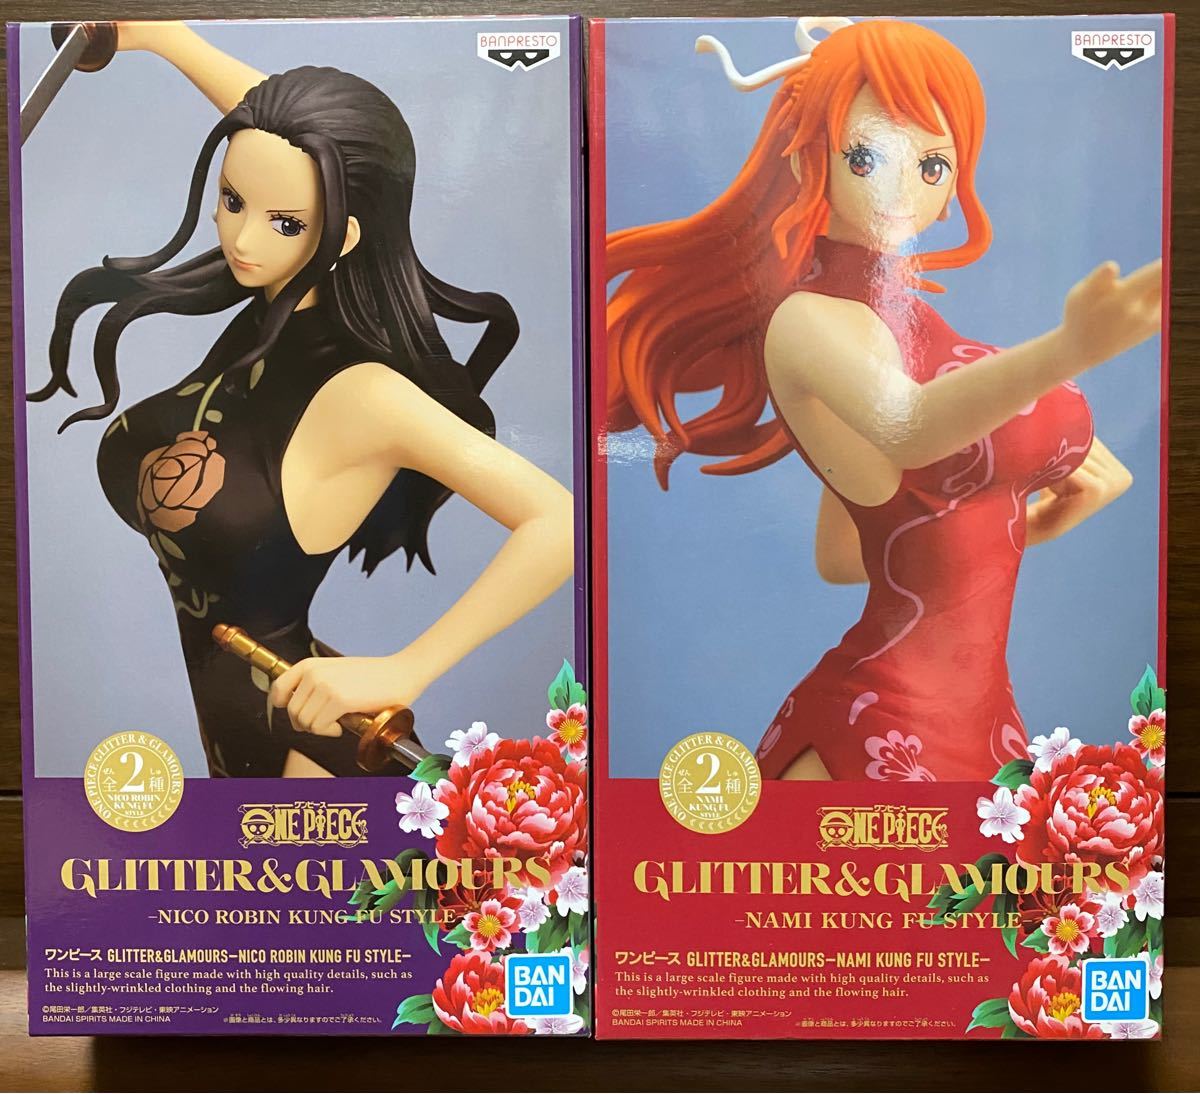 ONE PIECE GLITTER&GLAMOURS ナミ　ニコロビン フィギュア